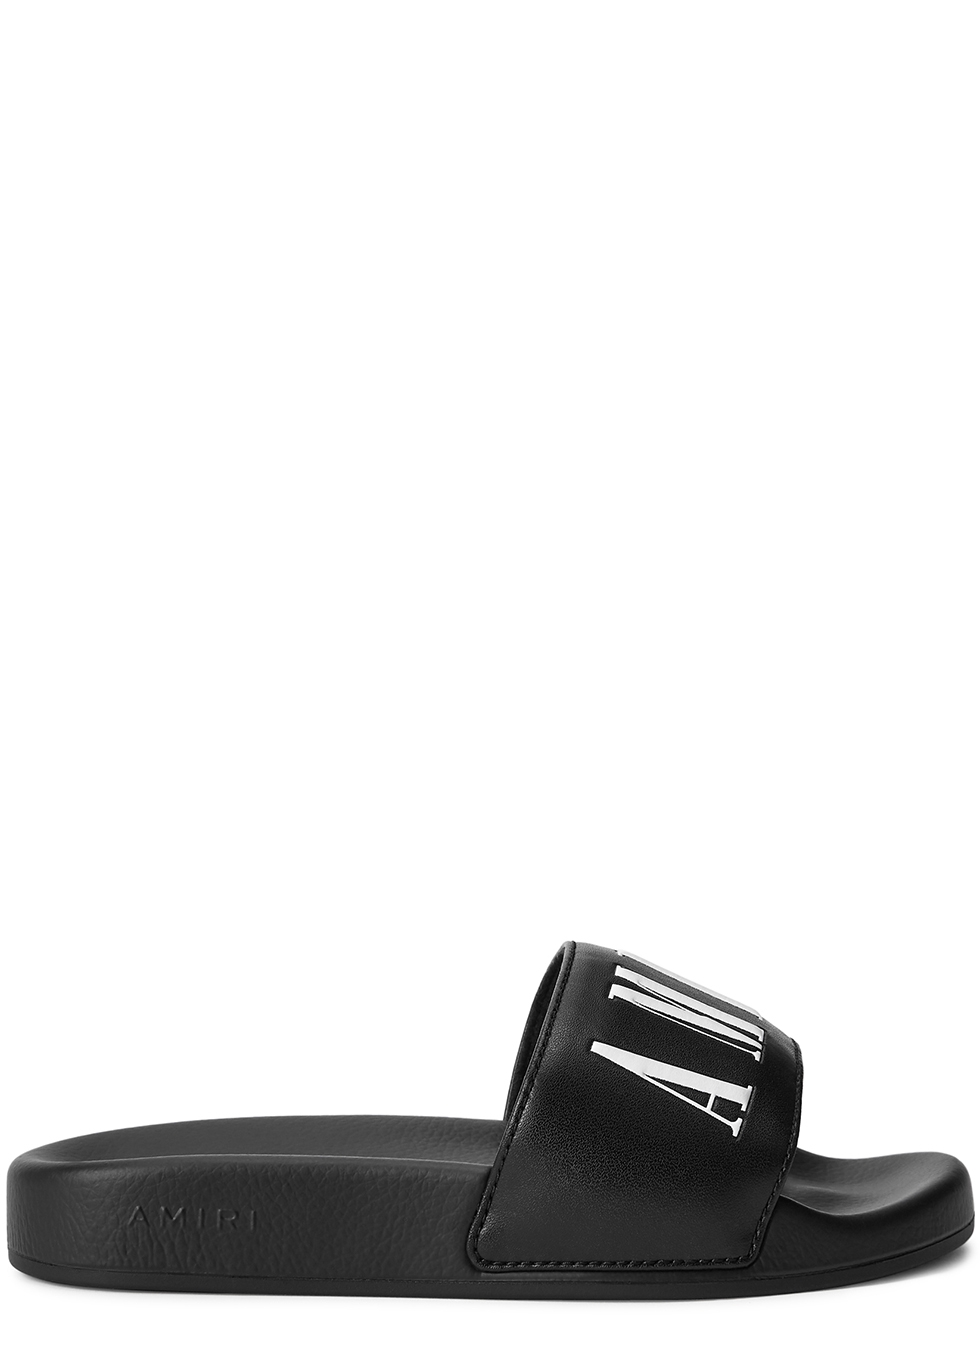 KIDS Black logo leather and rubber sliders